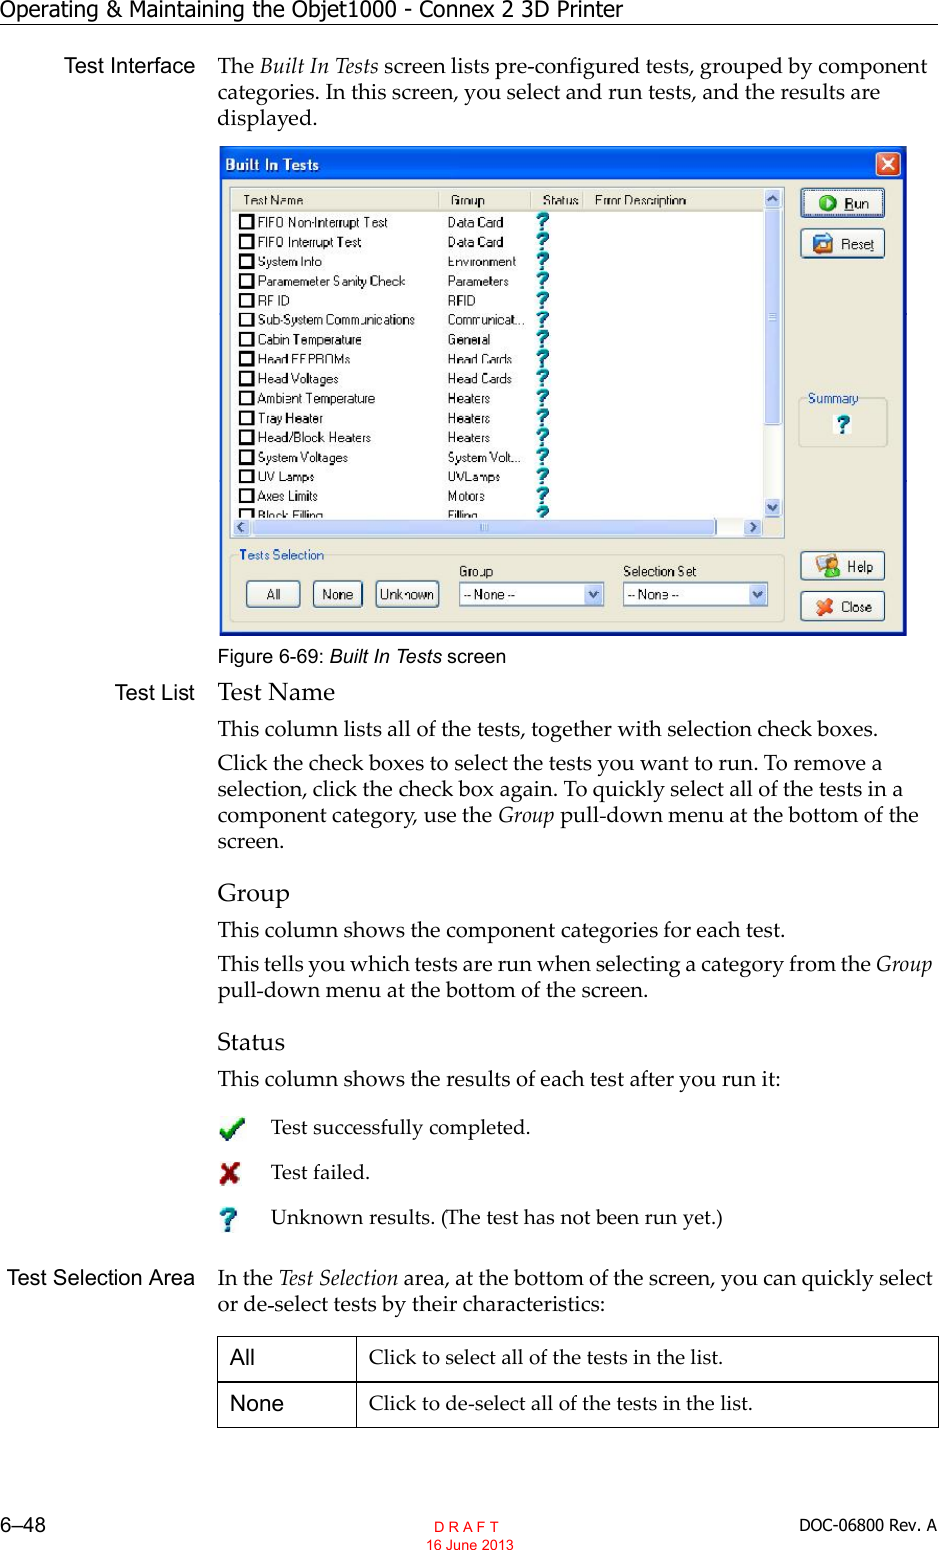 Operating &amp; Maintaining the Objet1000 - Connex 2 3D Printer6–48 DOC-06800 Rev. ATest Interface The Built In Tests screen lists pre configured tests, grouped by componentcategories. In this screen, you select and run tests, and the results aredisplayed.Figure 6-69: Built In Tests screenTest List Test NameThis column lists all of the tests, together with selection check boxes.Click the check boxes to select the tests you want to run. To remove aselection, click the check box again. To quickly select all of the tests in acomponent category, use the Group pull down menu at the bottom of thescreen.GroupThis column shows the component categories for each test.This tells you which tests are run when selecting a category from the Grouppull down menu at the bottom of the screen.StatusThis column shows the results of each test after you run it:Test Selection Area In the Test Selection area, at the bottom of the screen, you can quickly selector de select tests by their characteristics:Test successfully completed.Test failed.Unknown results. (The test has not been run yet.)All Click to select all of the tests in the list.None Click to de select all of the tests in the list.  D R A F T 16 June 2013